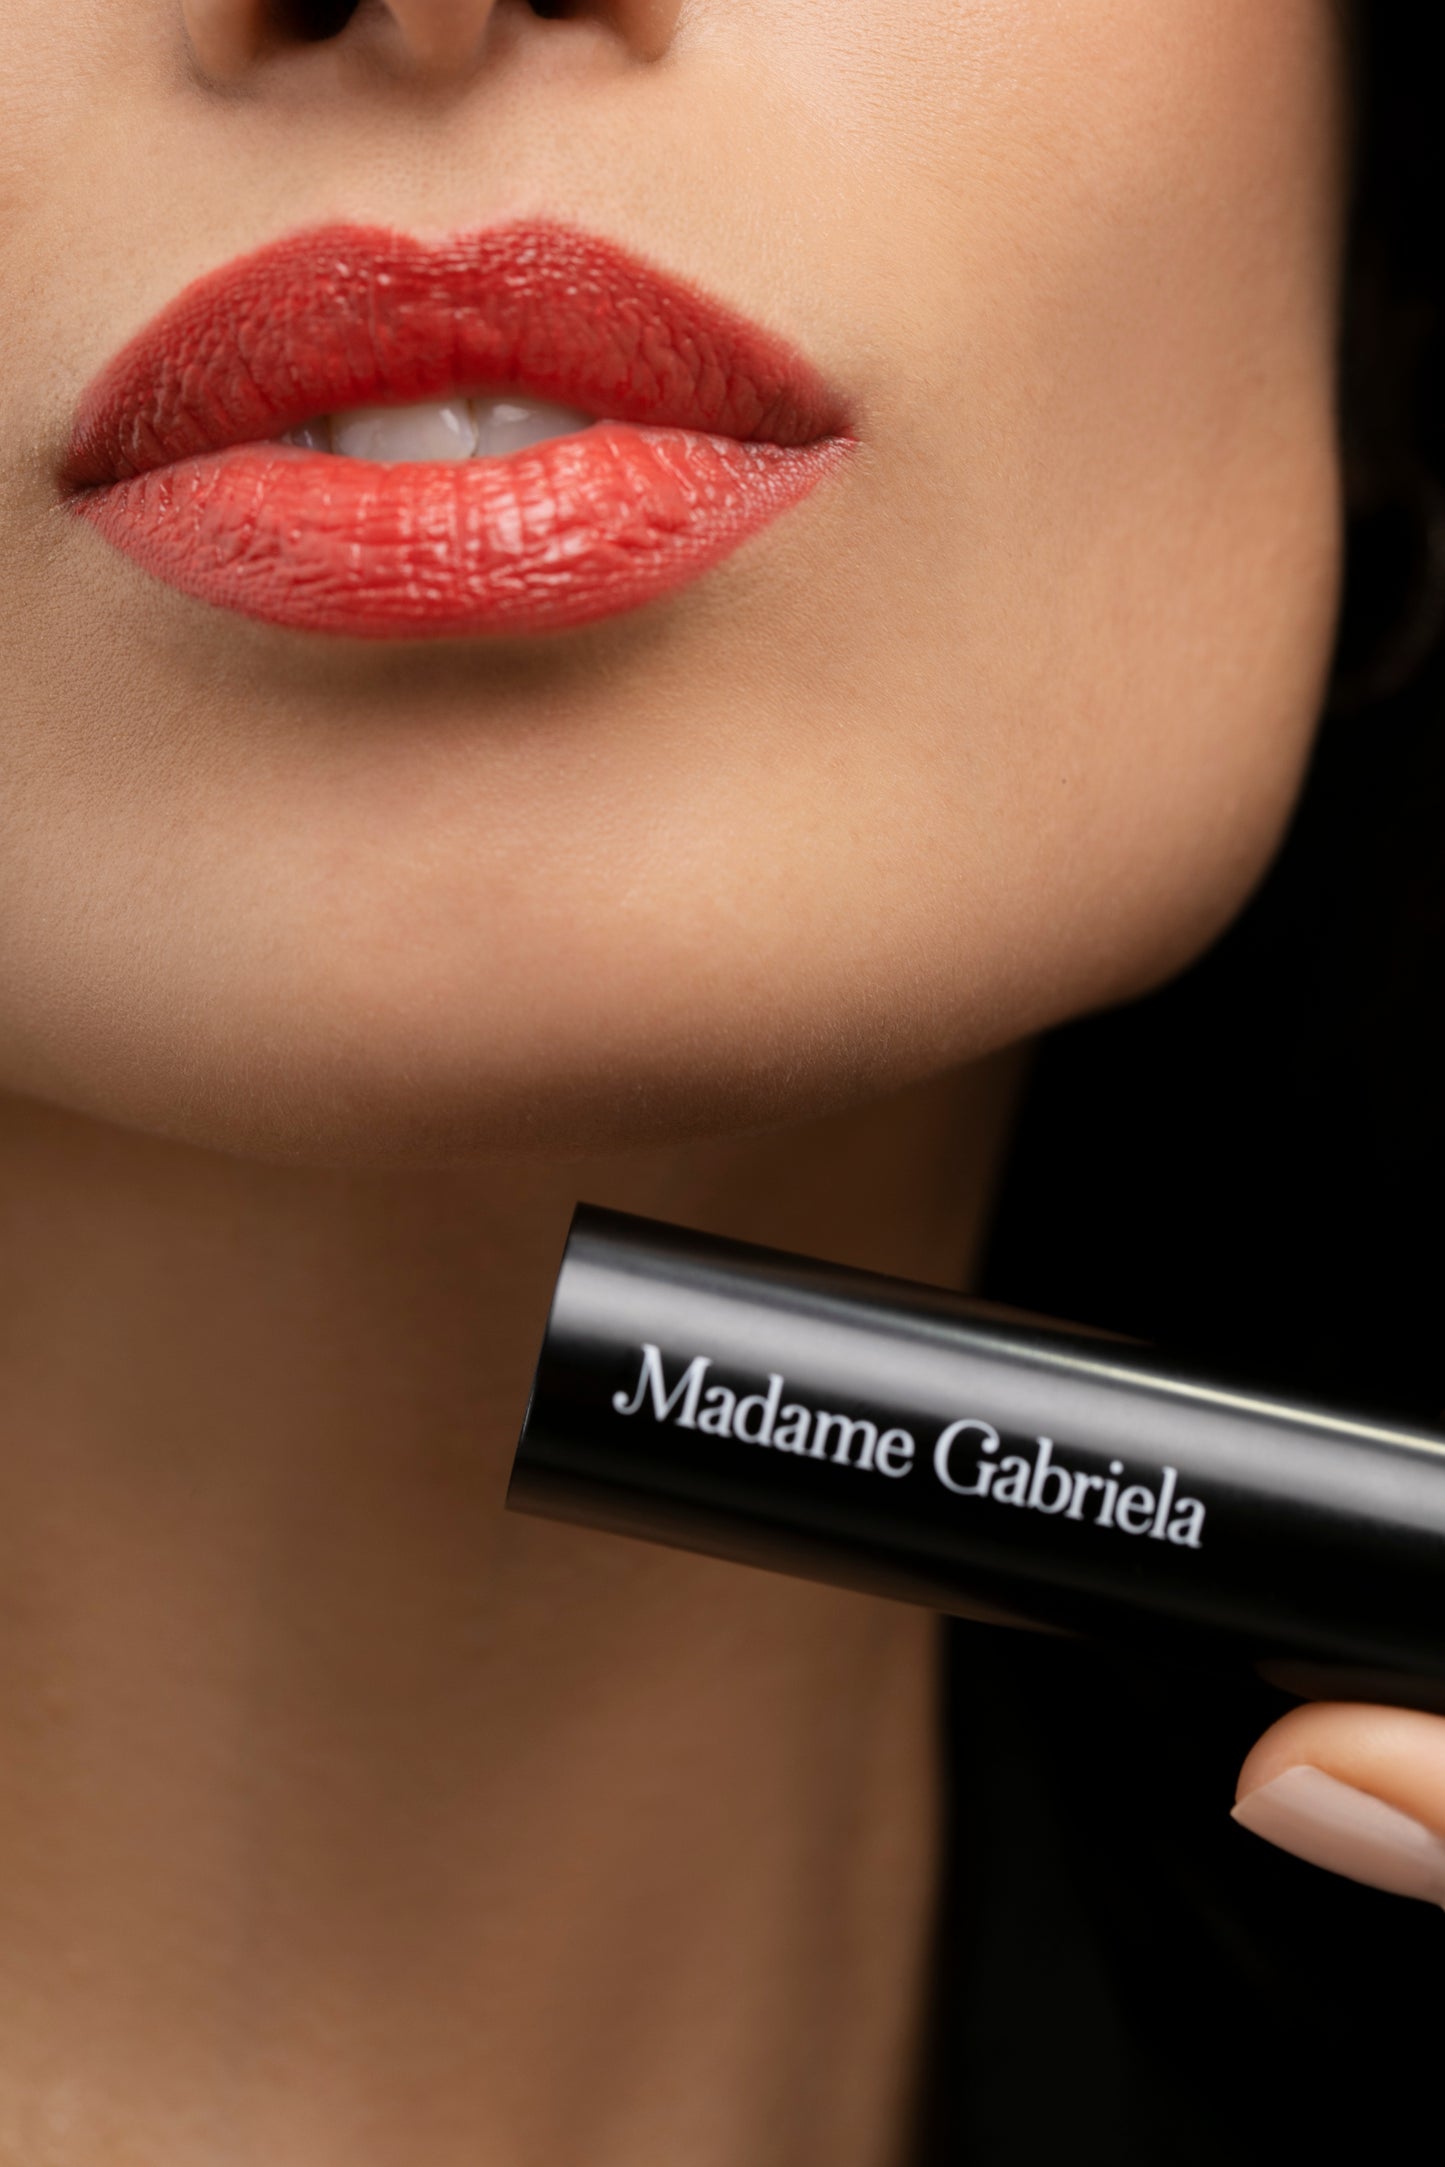 Mexico City at 9pm - Luxury Lipstick By Madame Gabriela